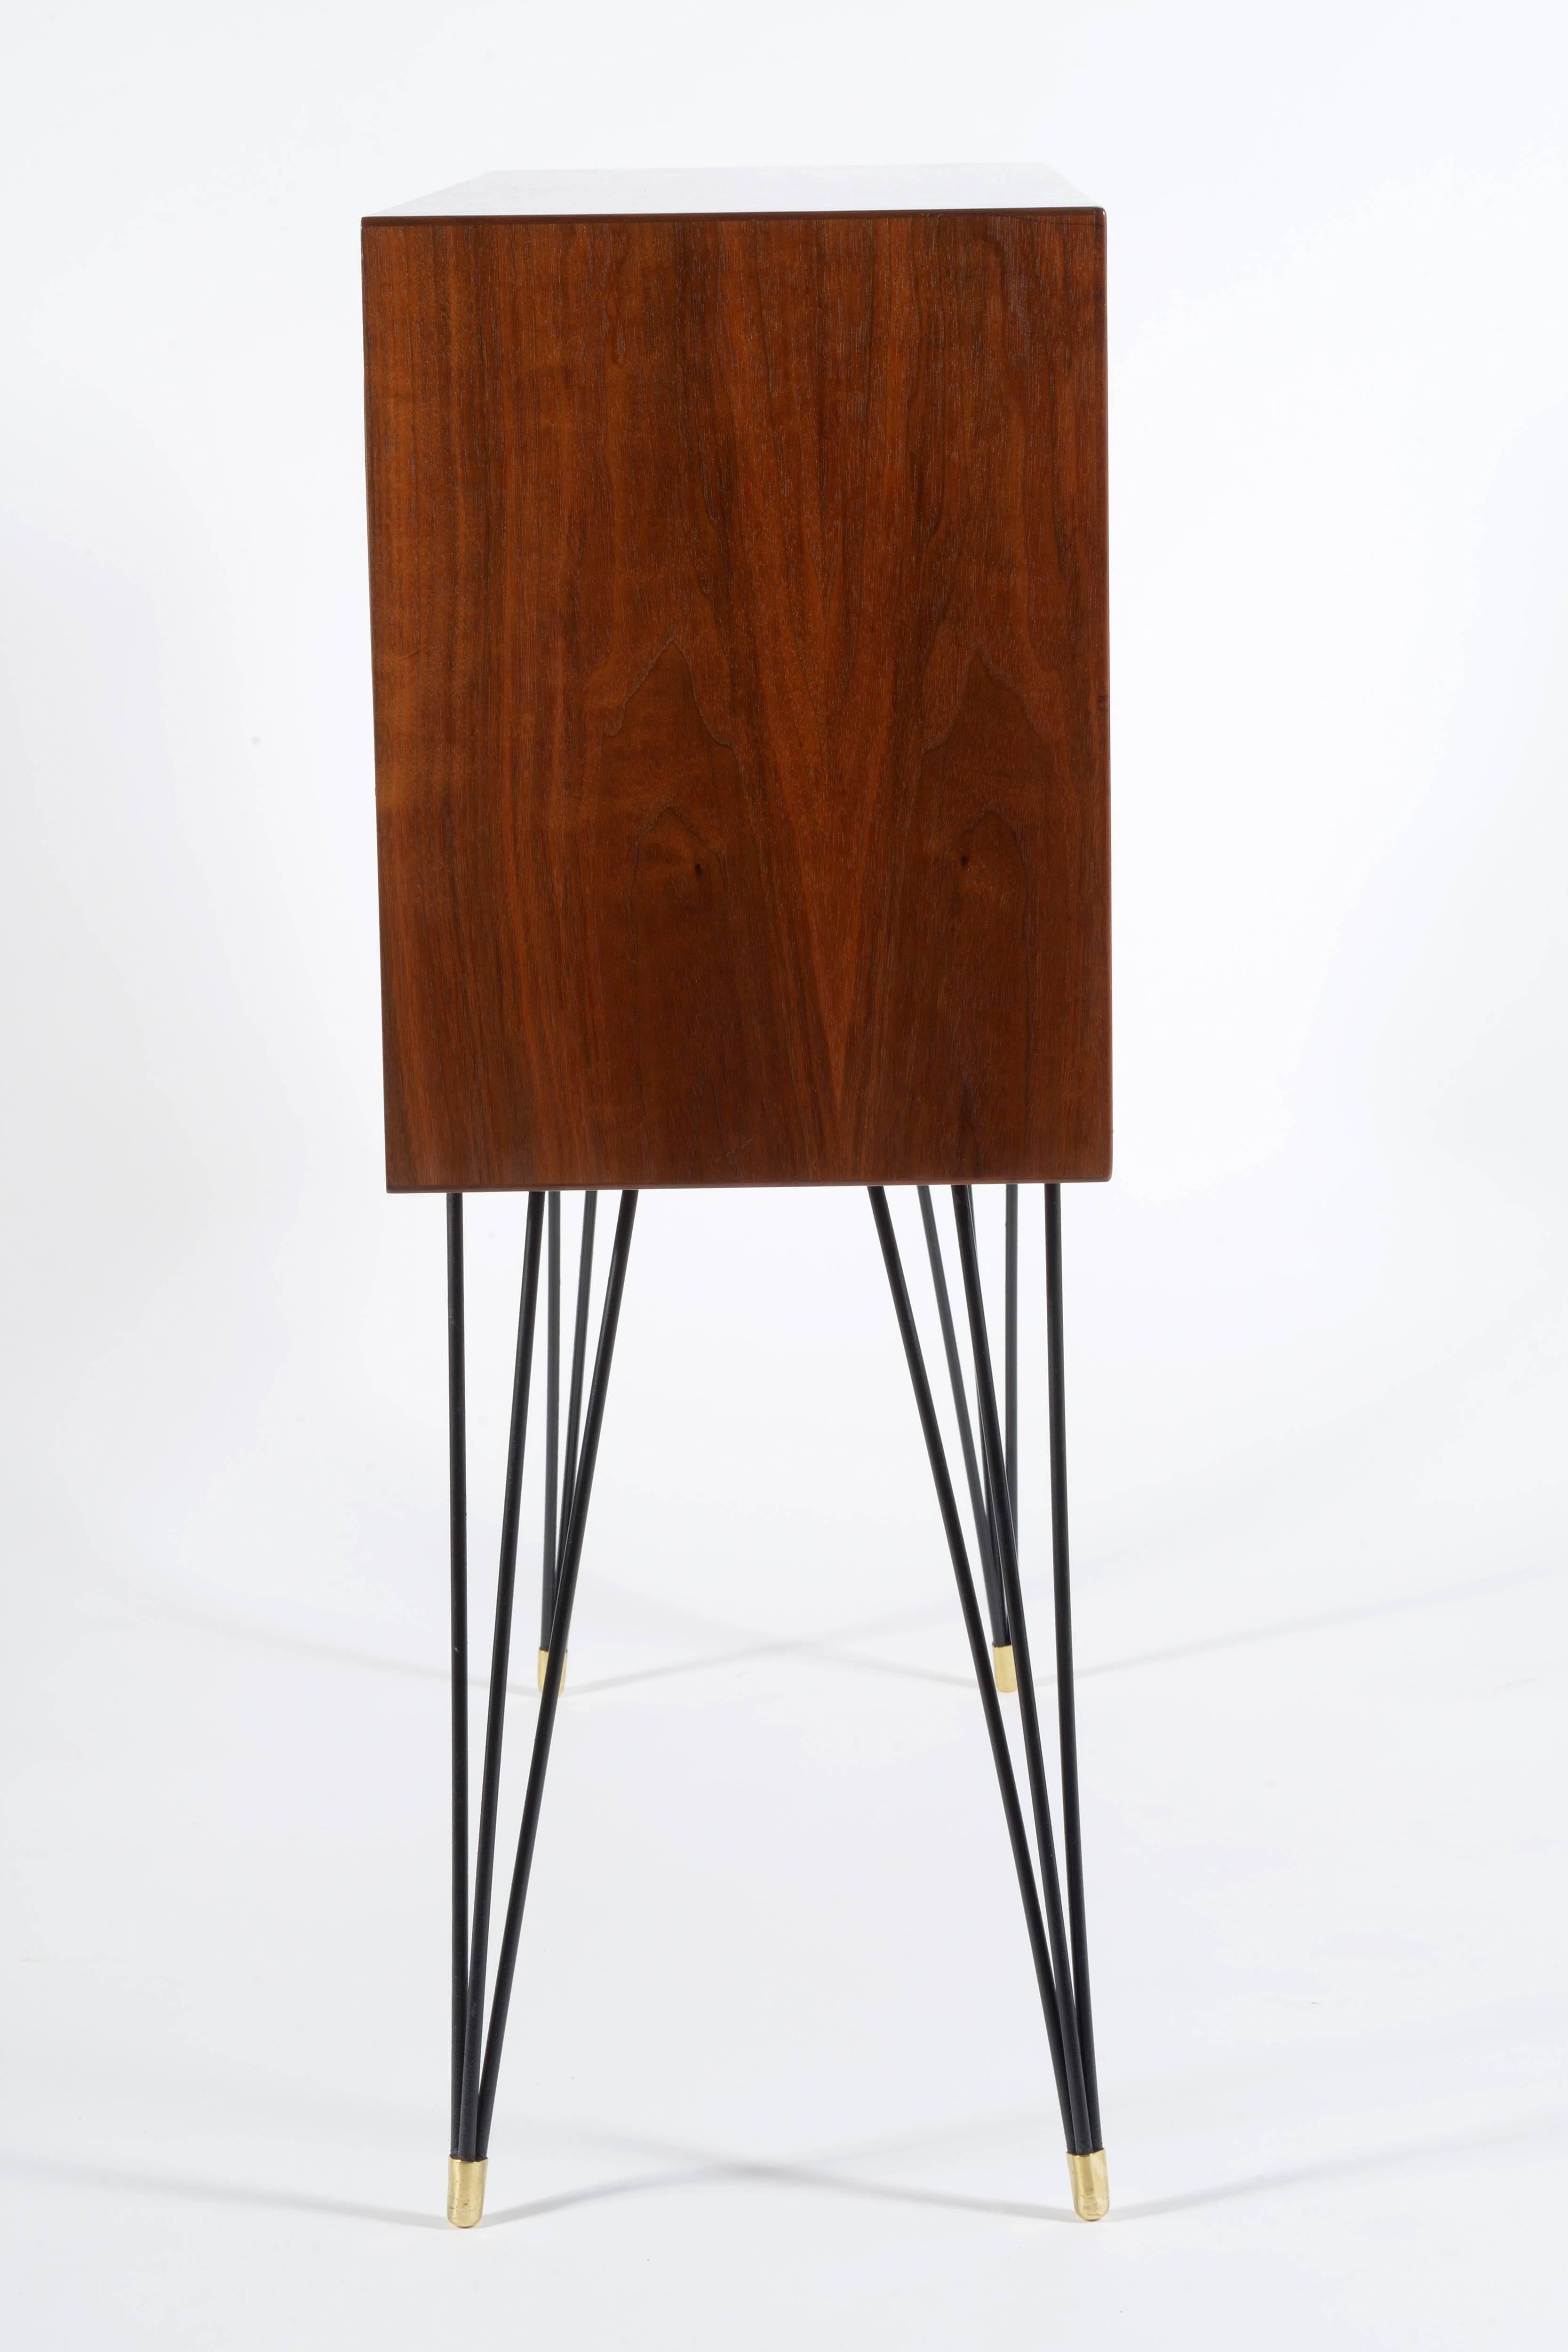 One  Slender Teak Wood Cabinet with Metal Legs, Signed In Good Condition For Sale In Firenze, Toscana